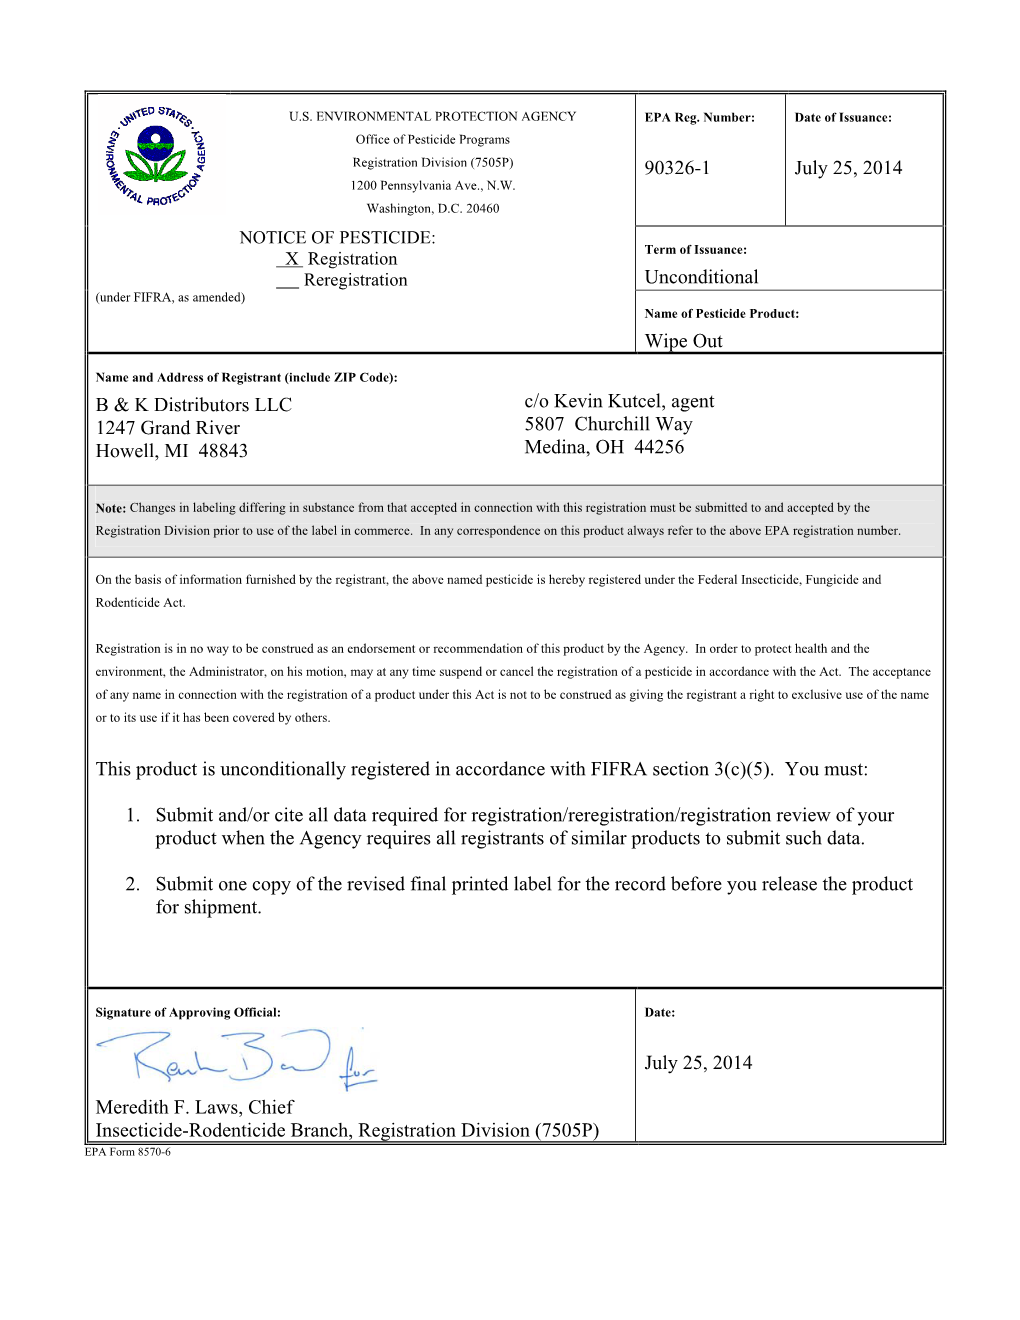 US EPA, Pesticide Product Label, WIPE OUT,25/07/2014